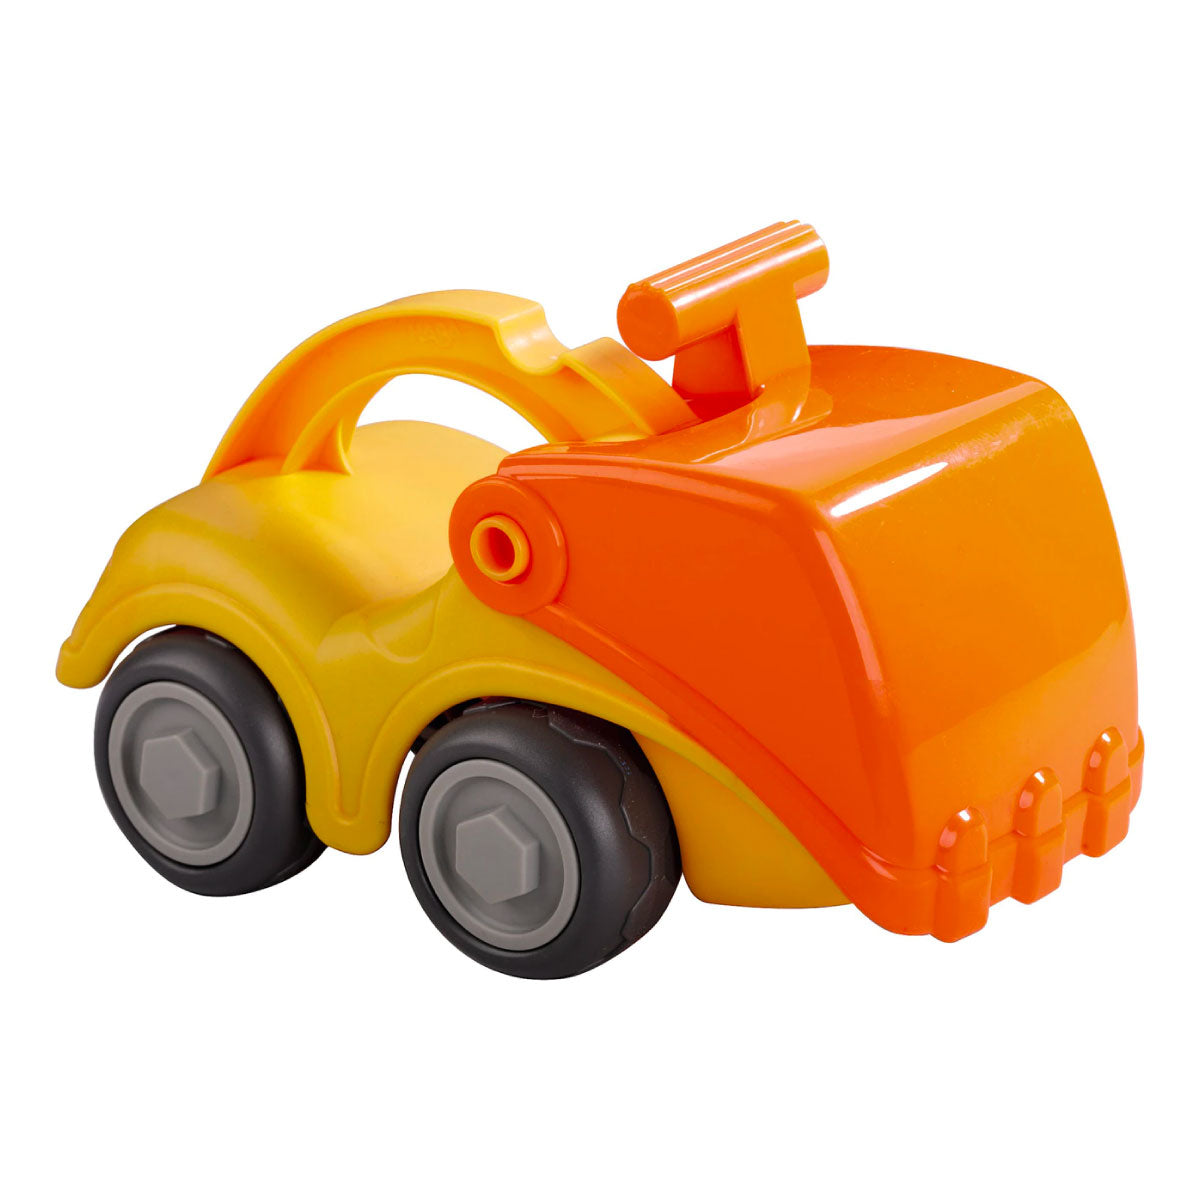 Sand Play Excavator from Haba